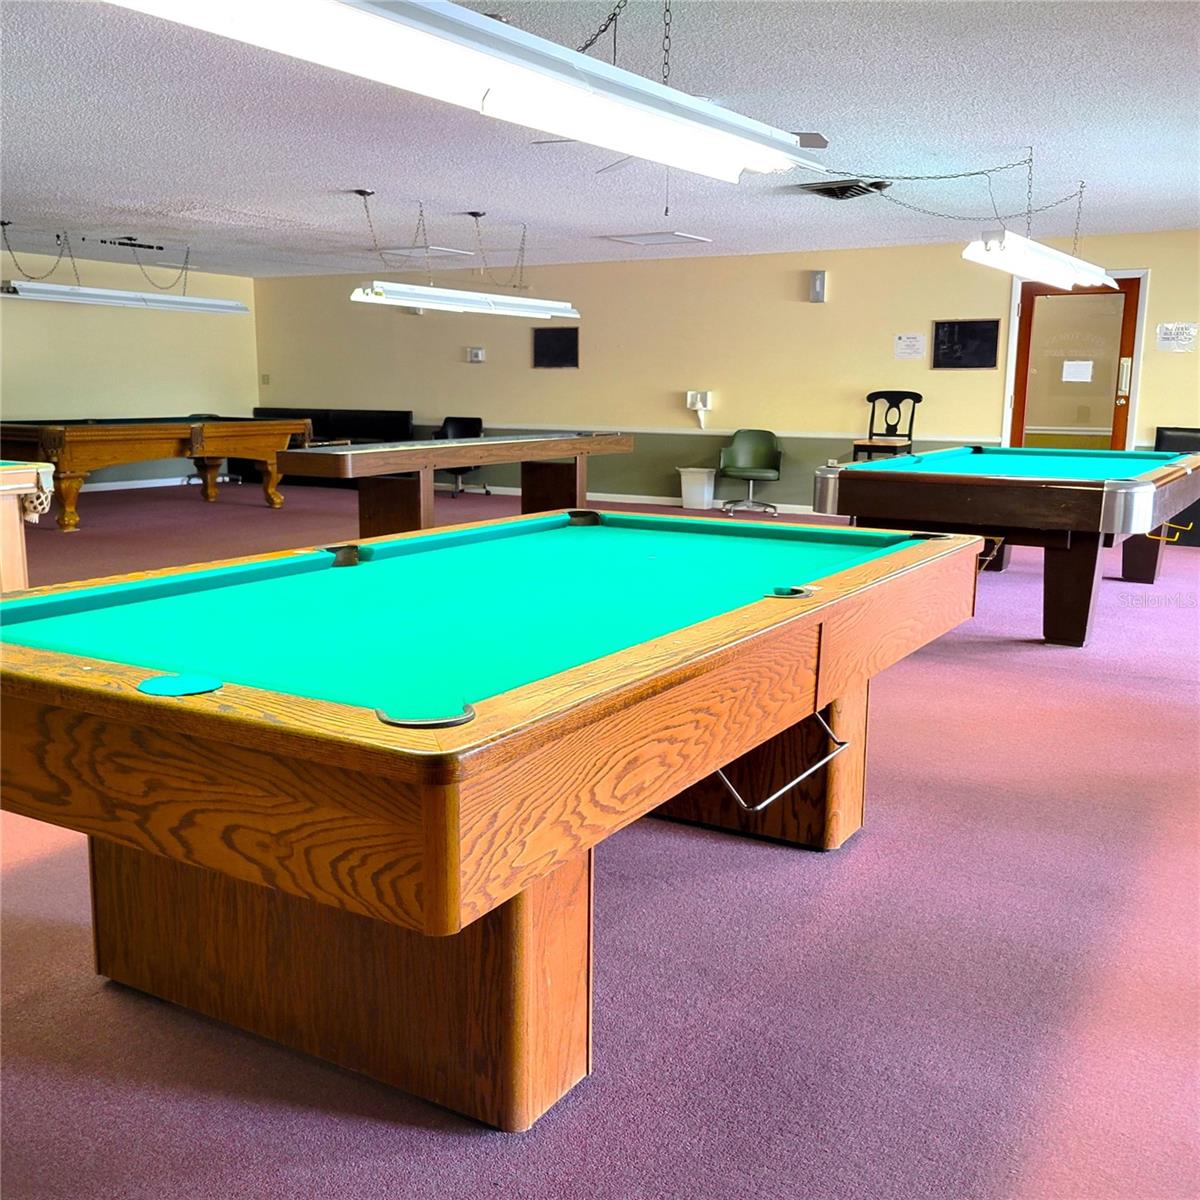 The community offer so much! A pool and game room!